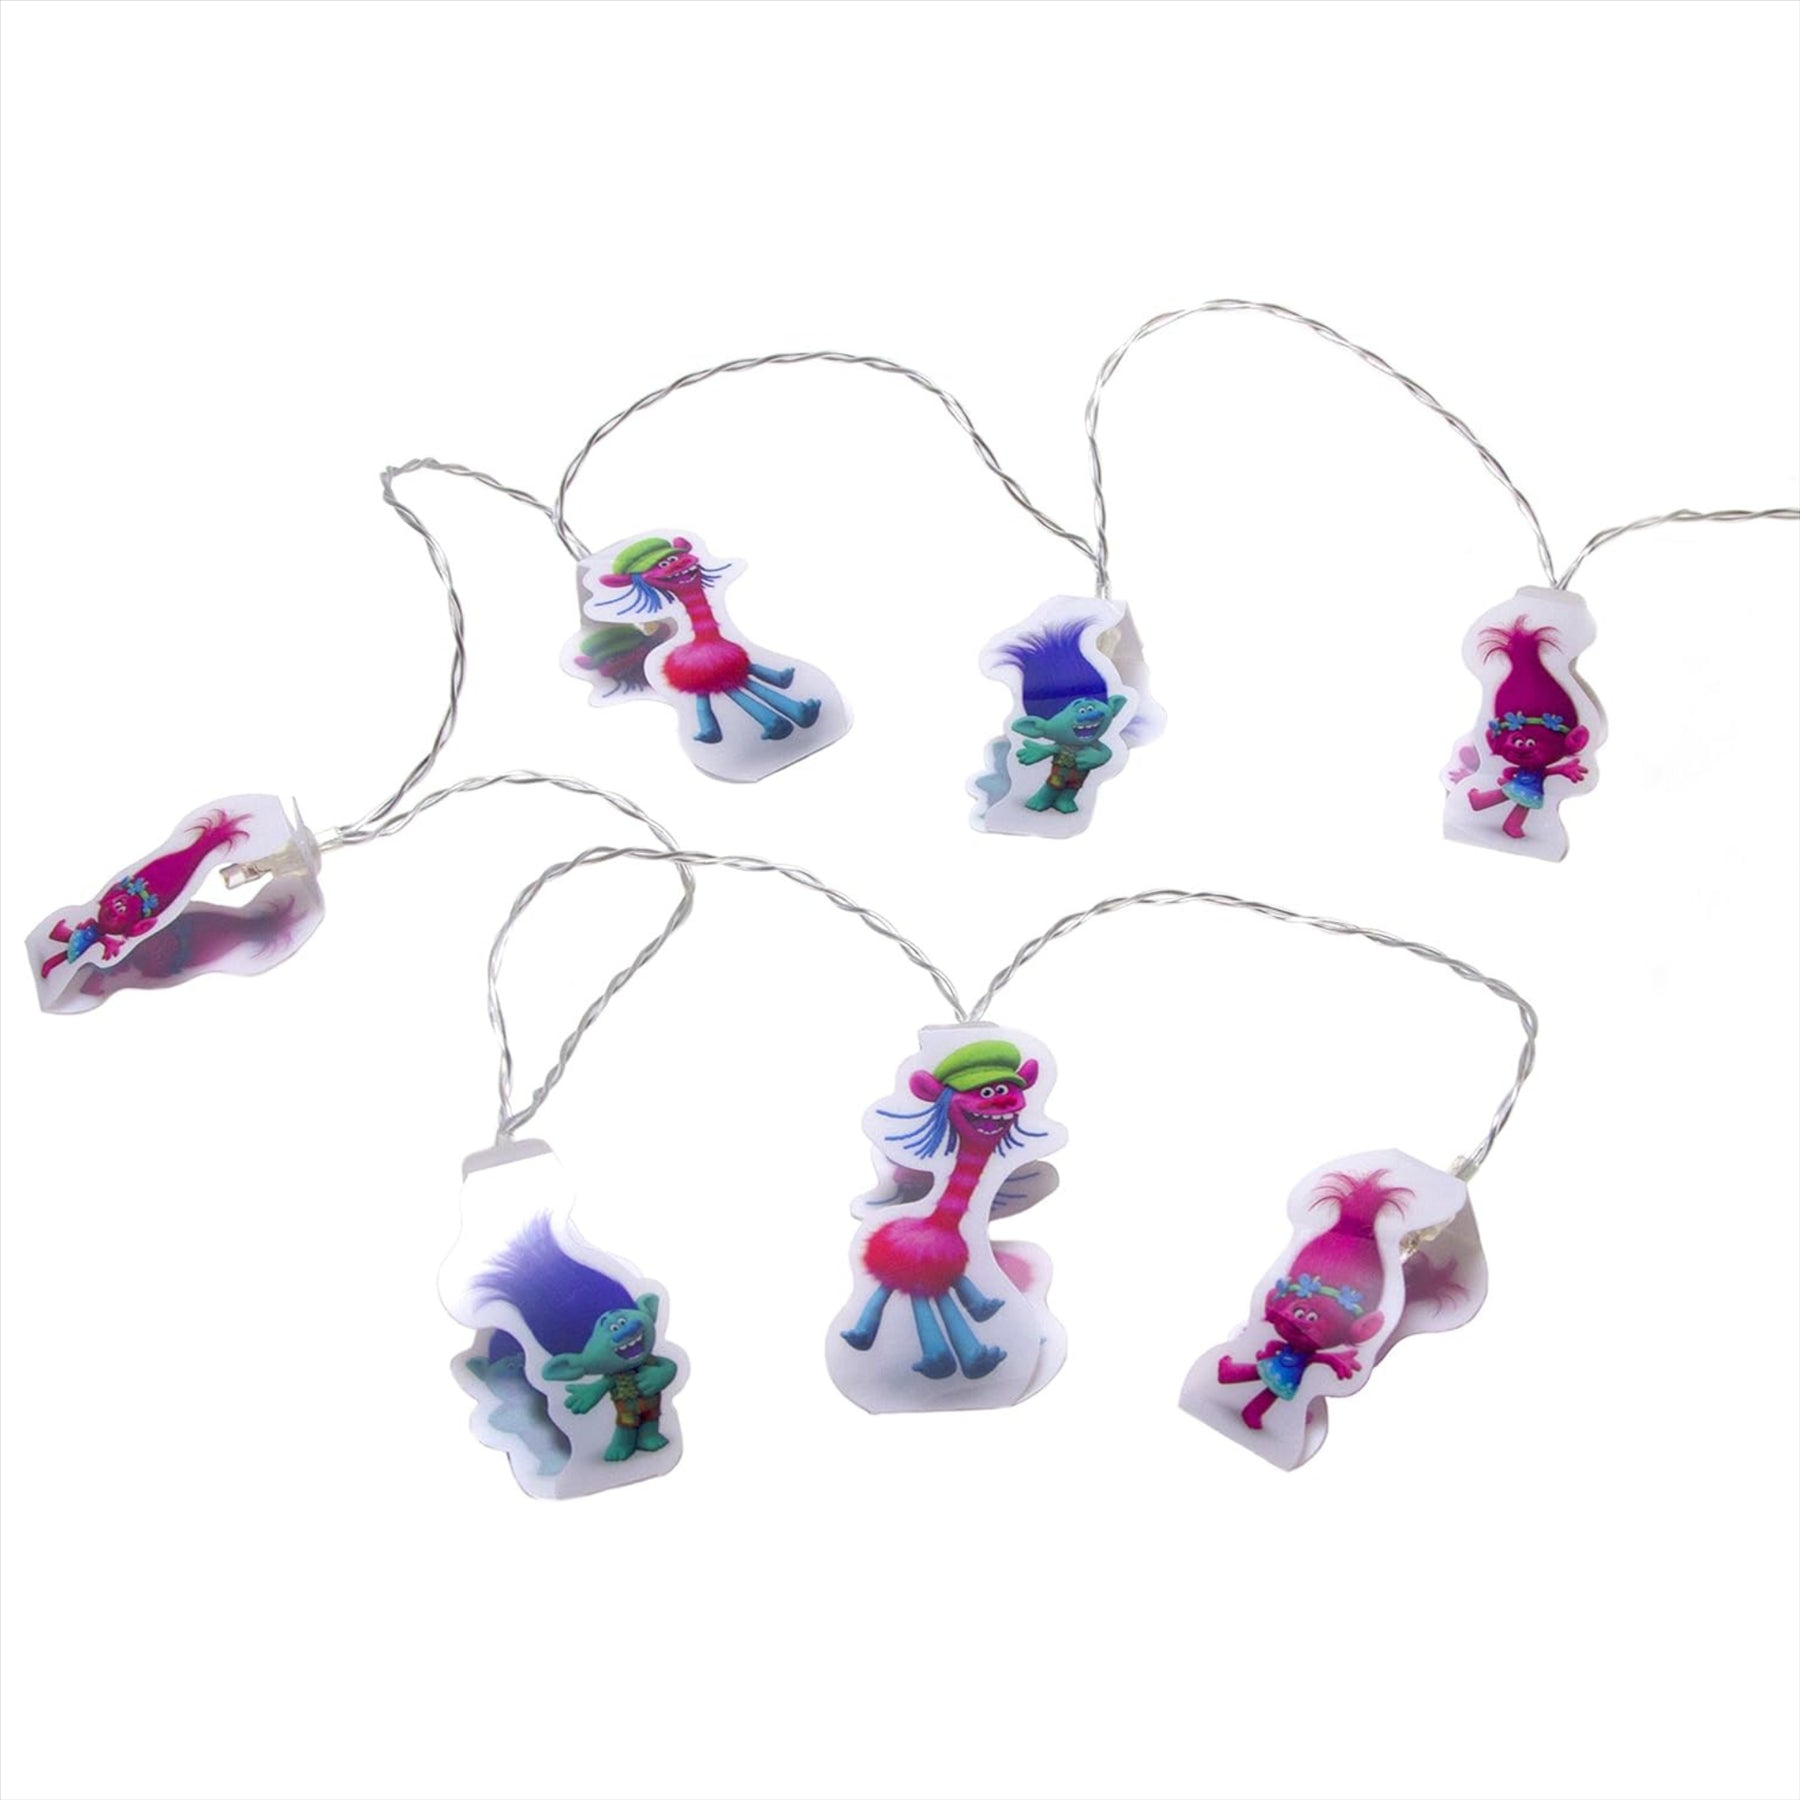 Trolls String Character Decorative LED Lights - 2.8 Metre Cable - Toptoys2u